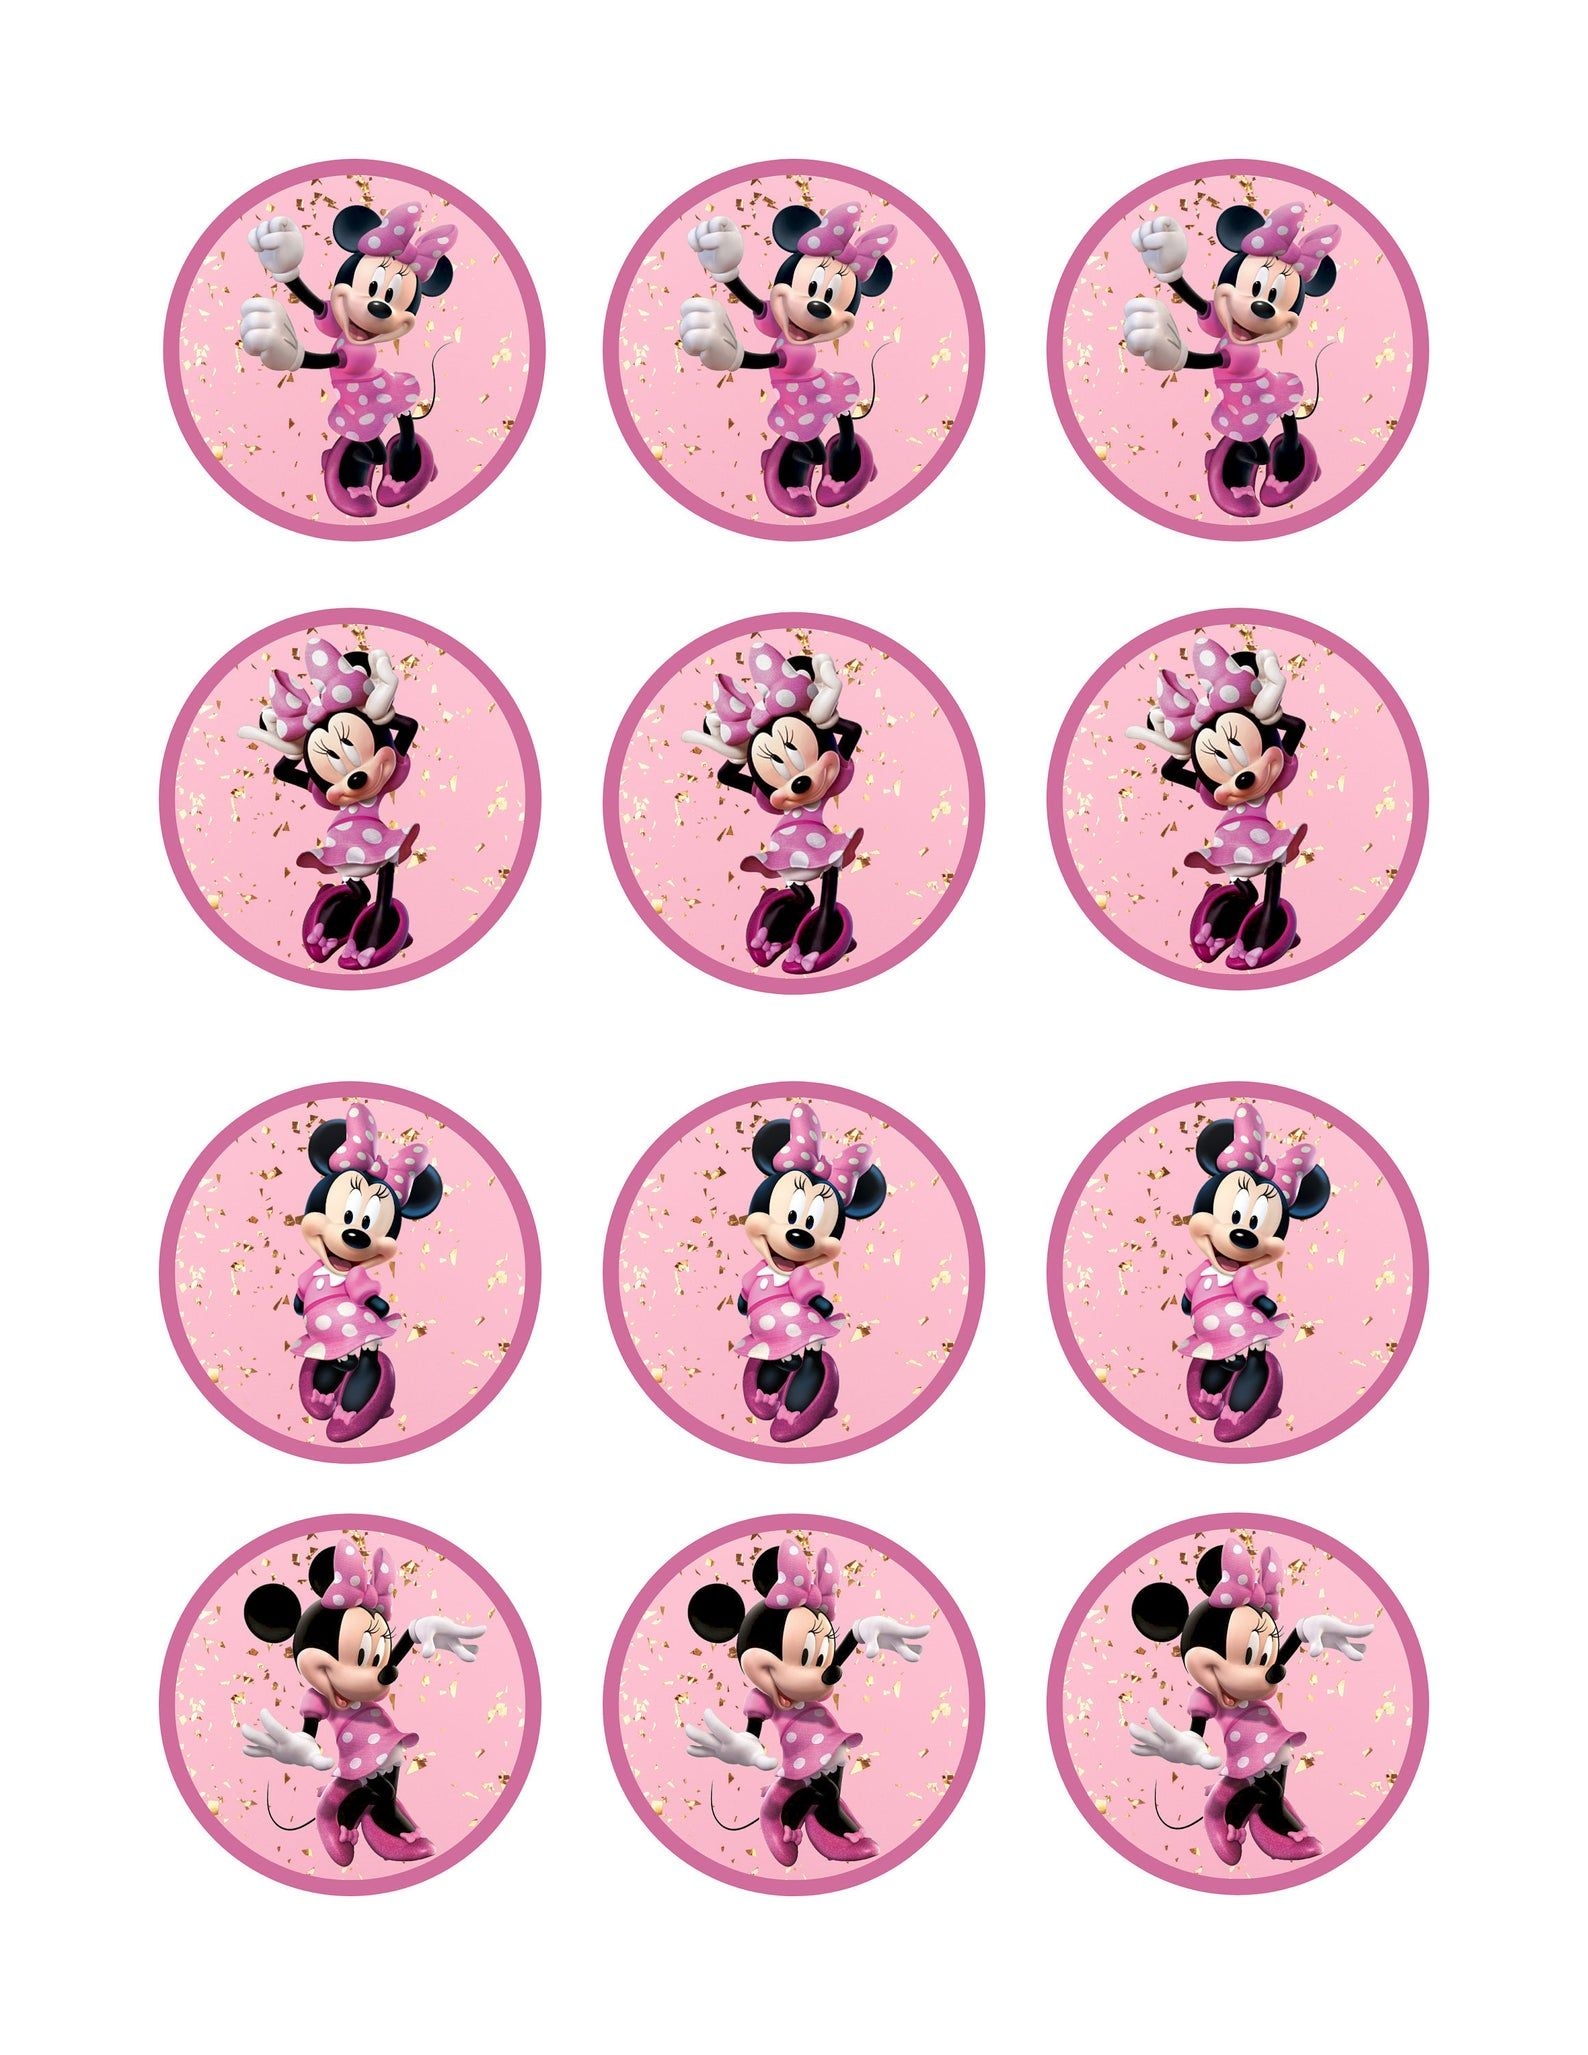 Minnie Mouse Toppers Pink Minnie Mouse Cupcake Toppers Minnie Mouse Birthday Set Of 12 Party Favor Digital Printable Instant Download Etsy Cumplea os De Minnie Mouse Cupcakes De Minnie Mouse Imprimibles Minnie